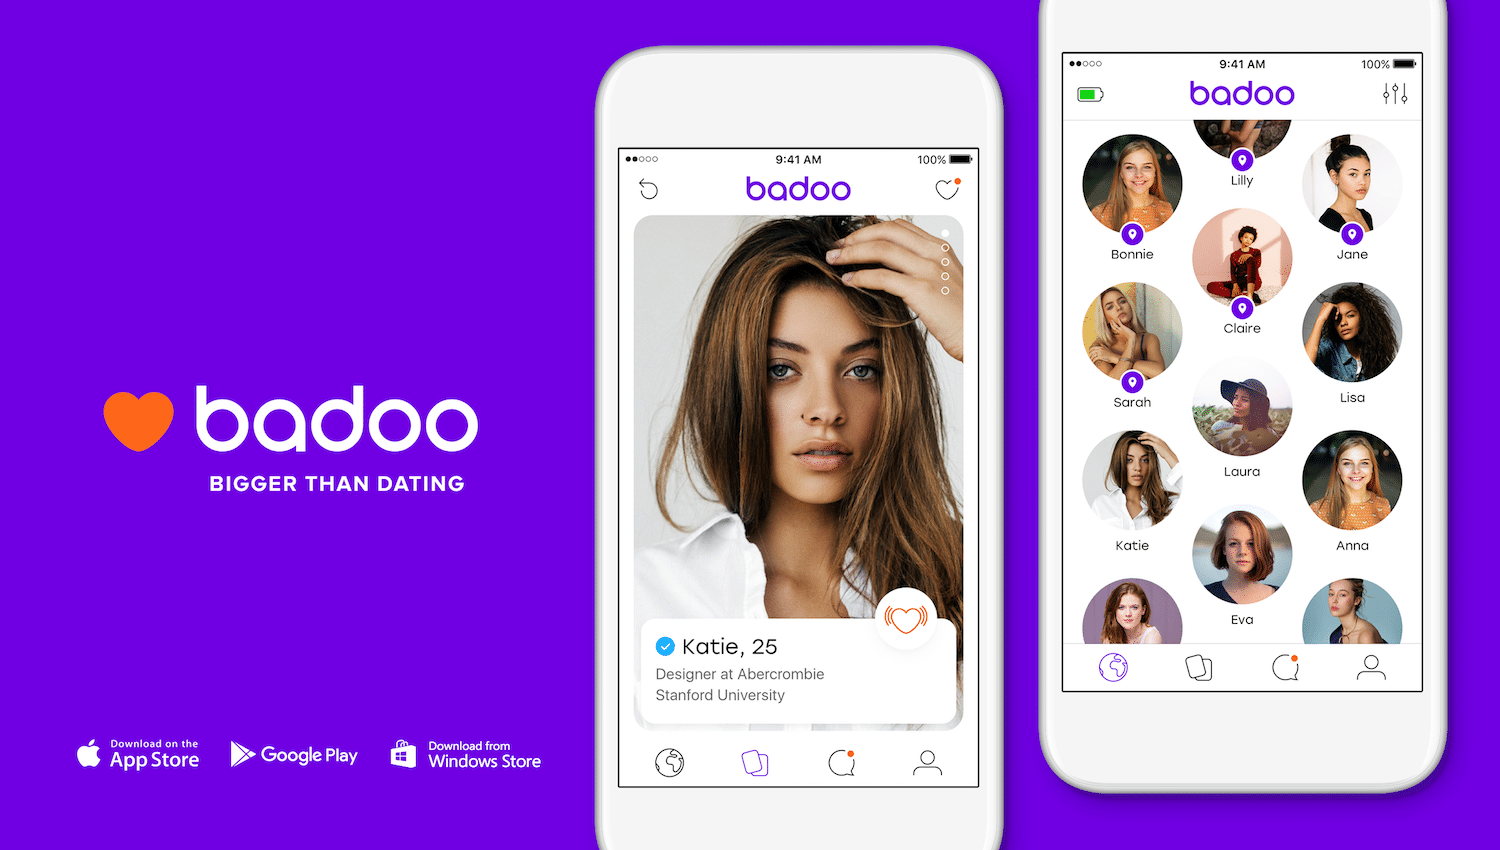 Badoo messages disappeared